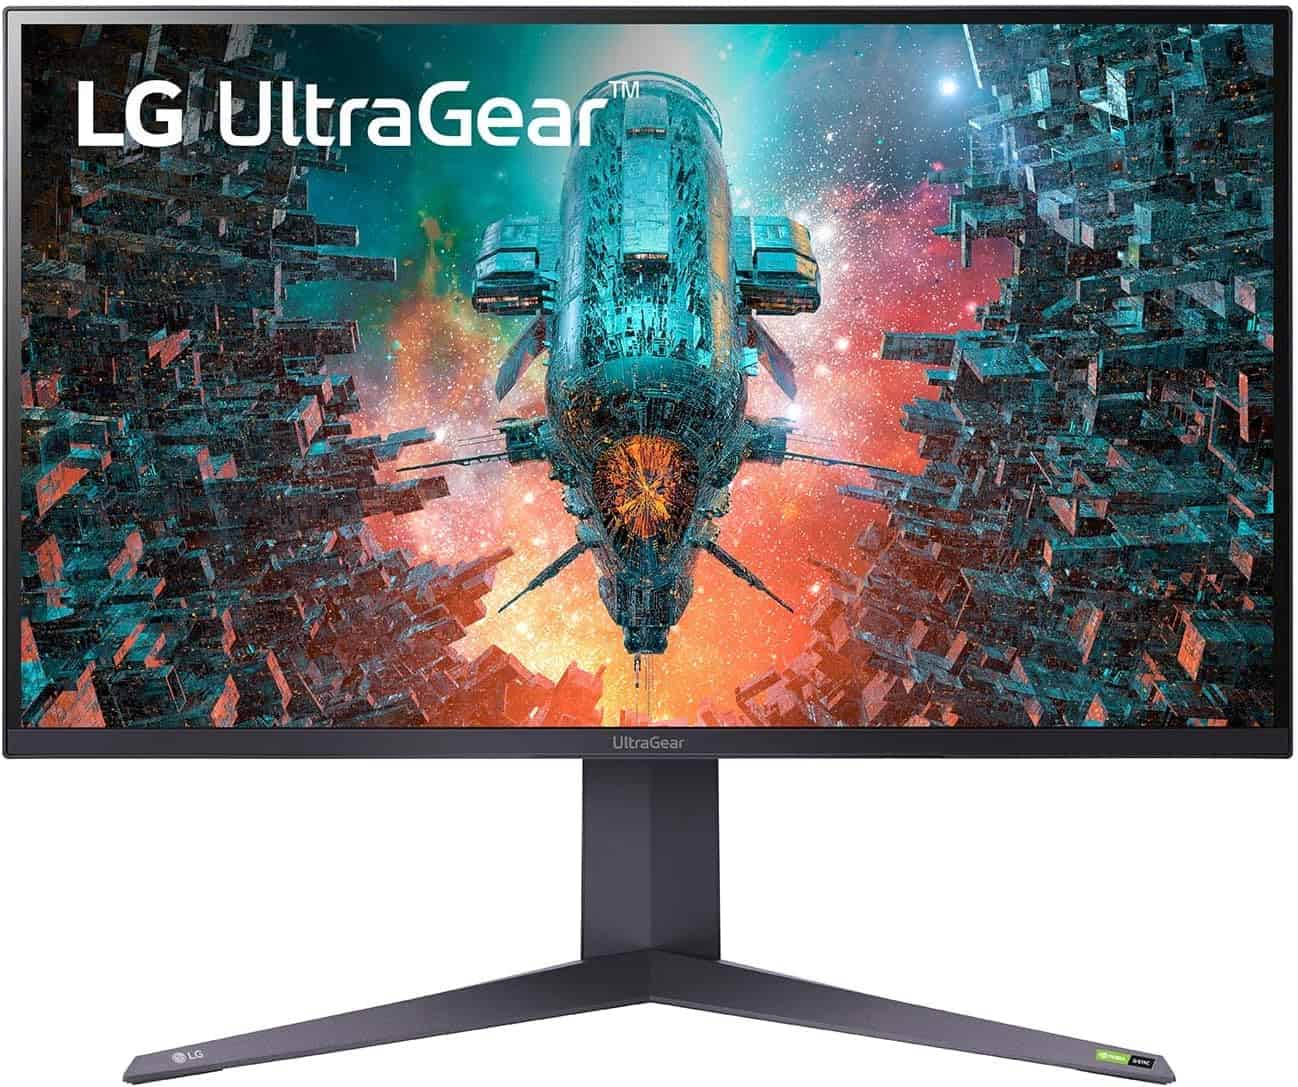 Don’t miss out on this amazing Amazon deal: Save an impressive 0 on the incredible LG 4K gaming monitor